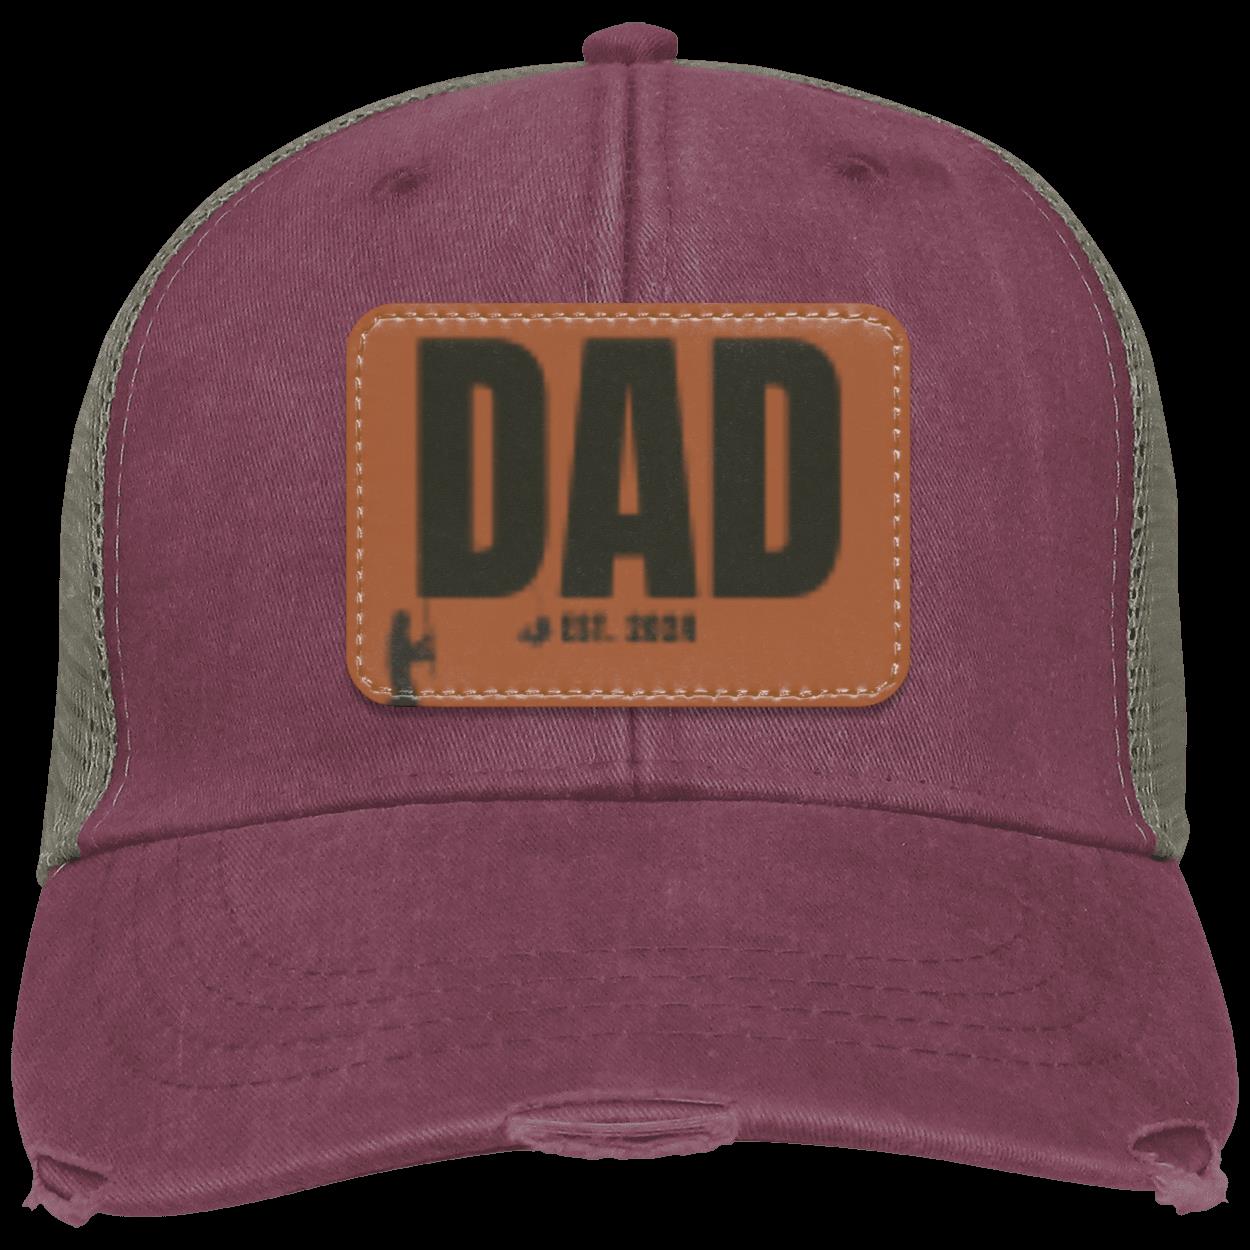 PAPA Fishing Tribute Cap (Black)  || Gift for Dad || - Stylish Outdoor Wear for Dads, Comfortable and Durable